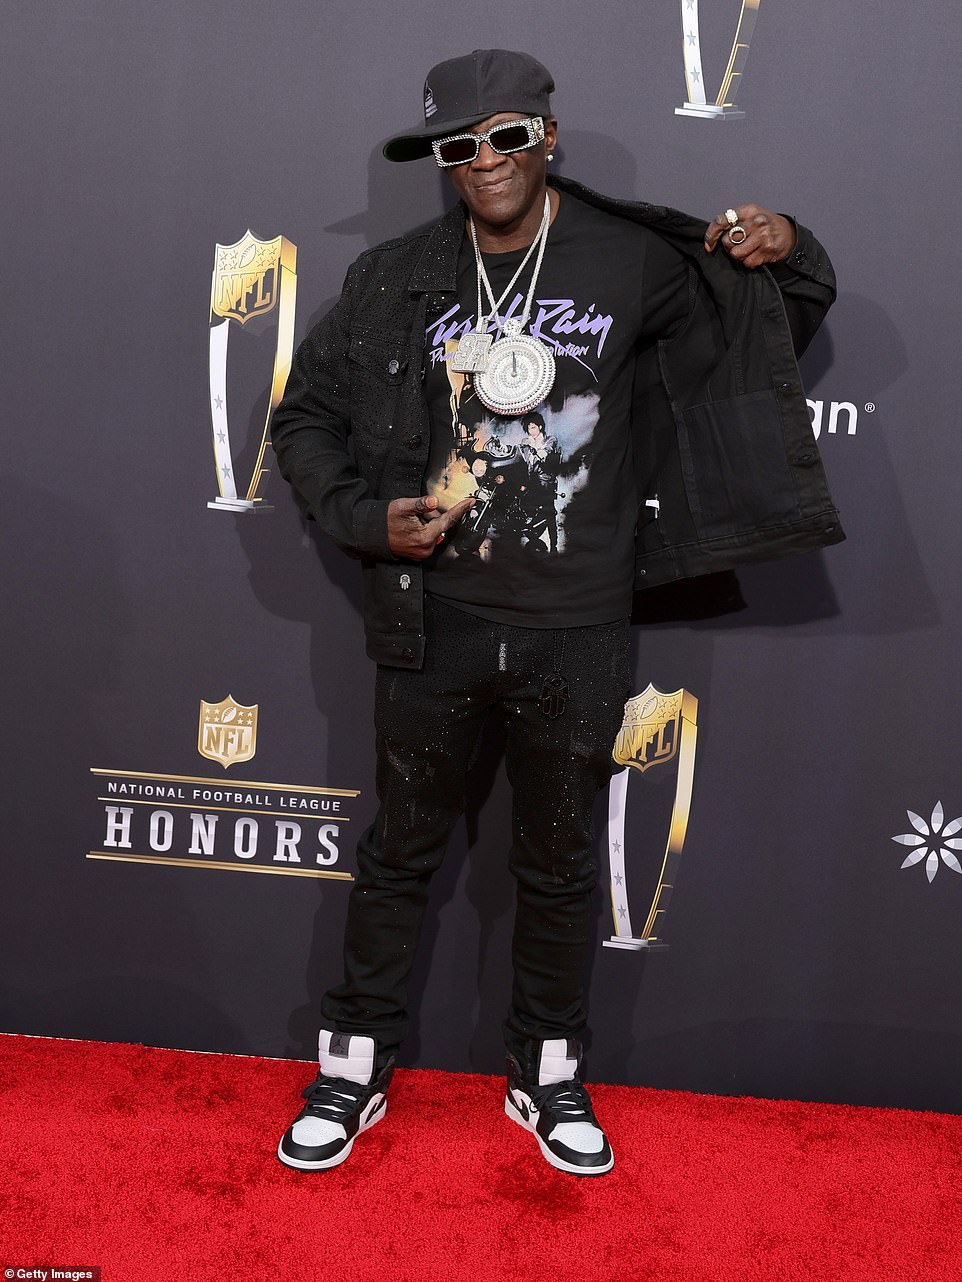 Flavor Flav stole the show with her inimitable fashion sense